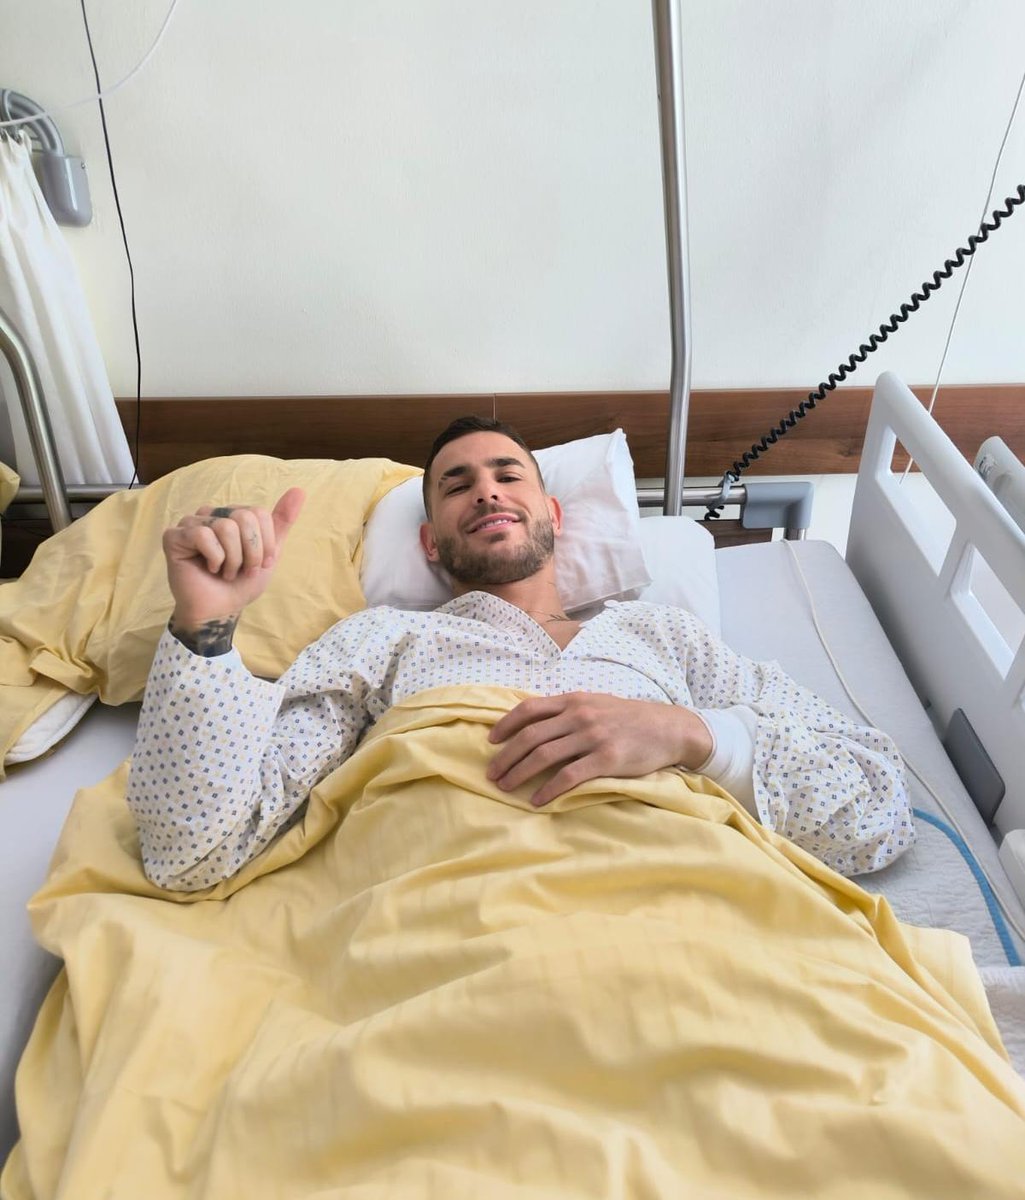 Medical update 📌 Lucas Hernández underwent a successful operation today in Austria, performed by Professor Cristian Fink. He will now begin a period of rehabilitation. A further update will be made in due course. @Aspetar